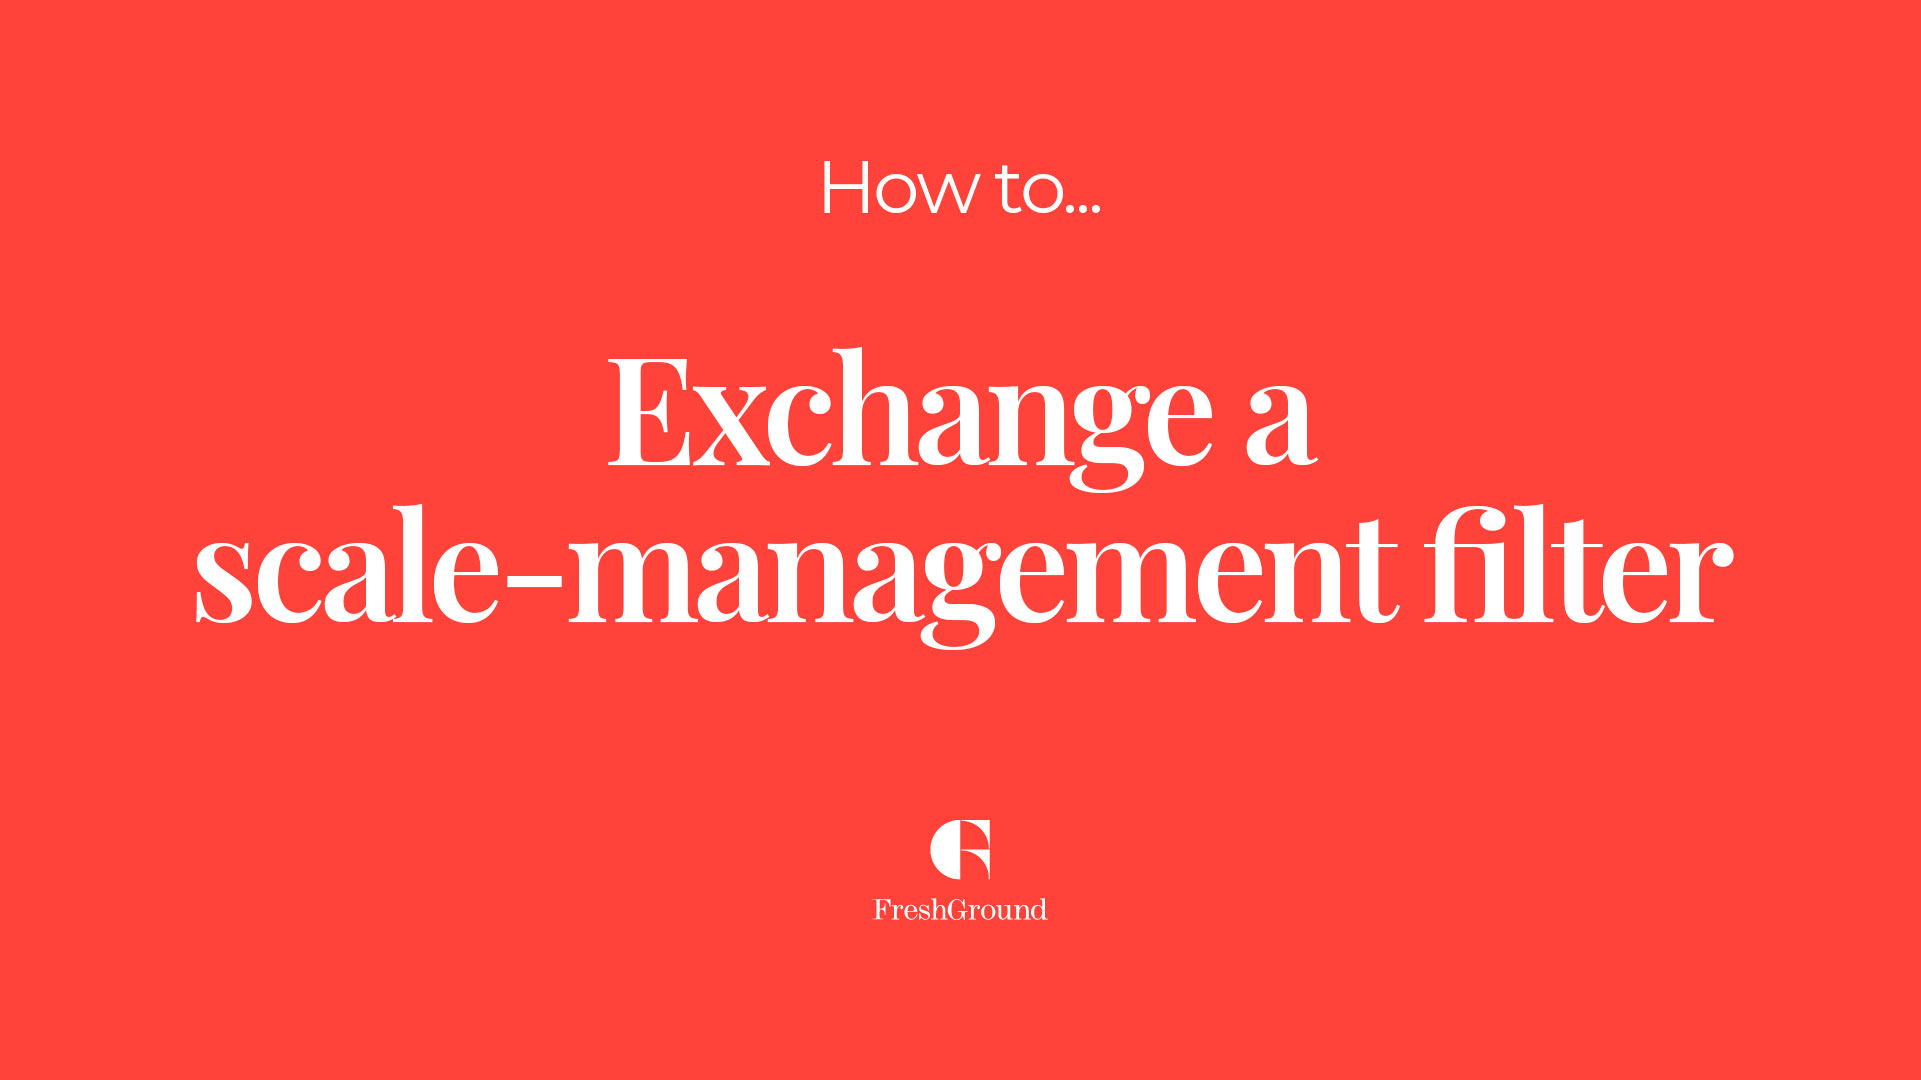 Exchange a scale management filter video title card